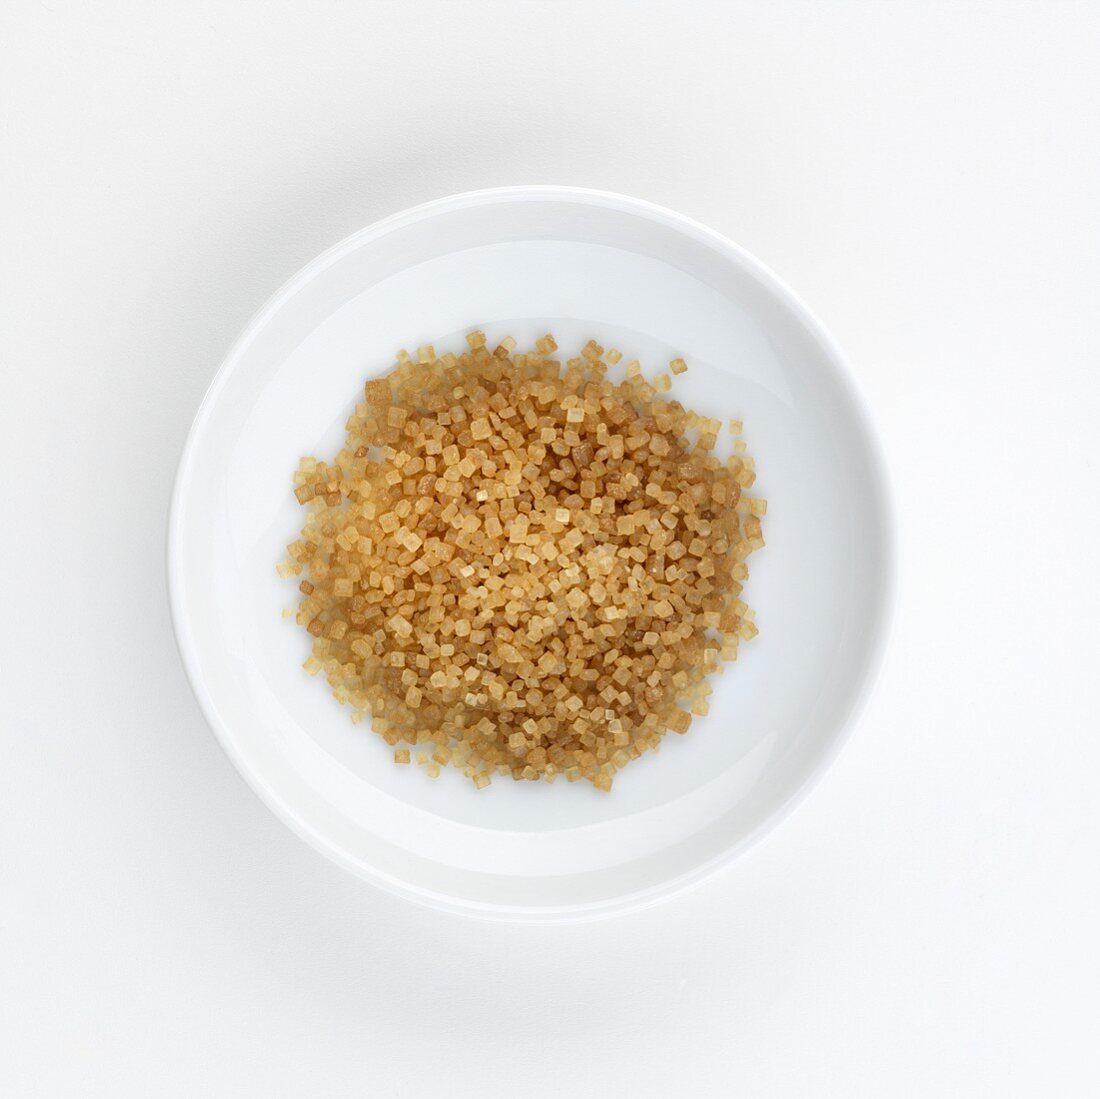 Brown cane sugar on a plate, seen from above